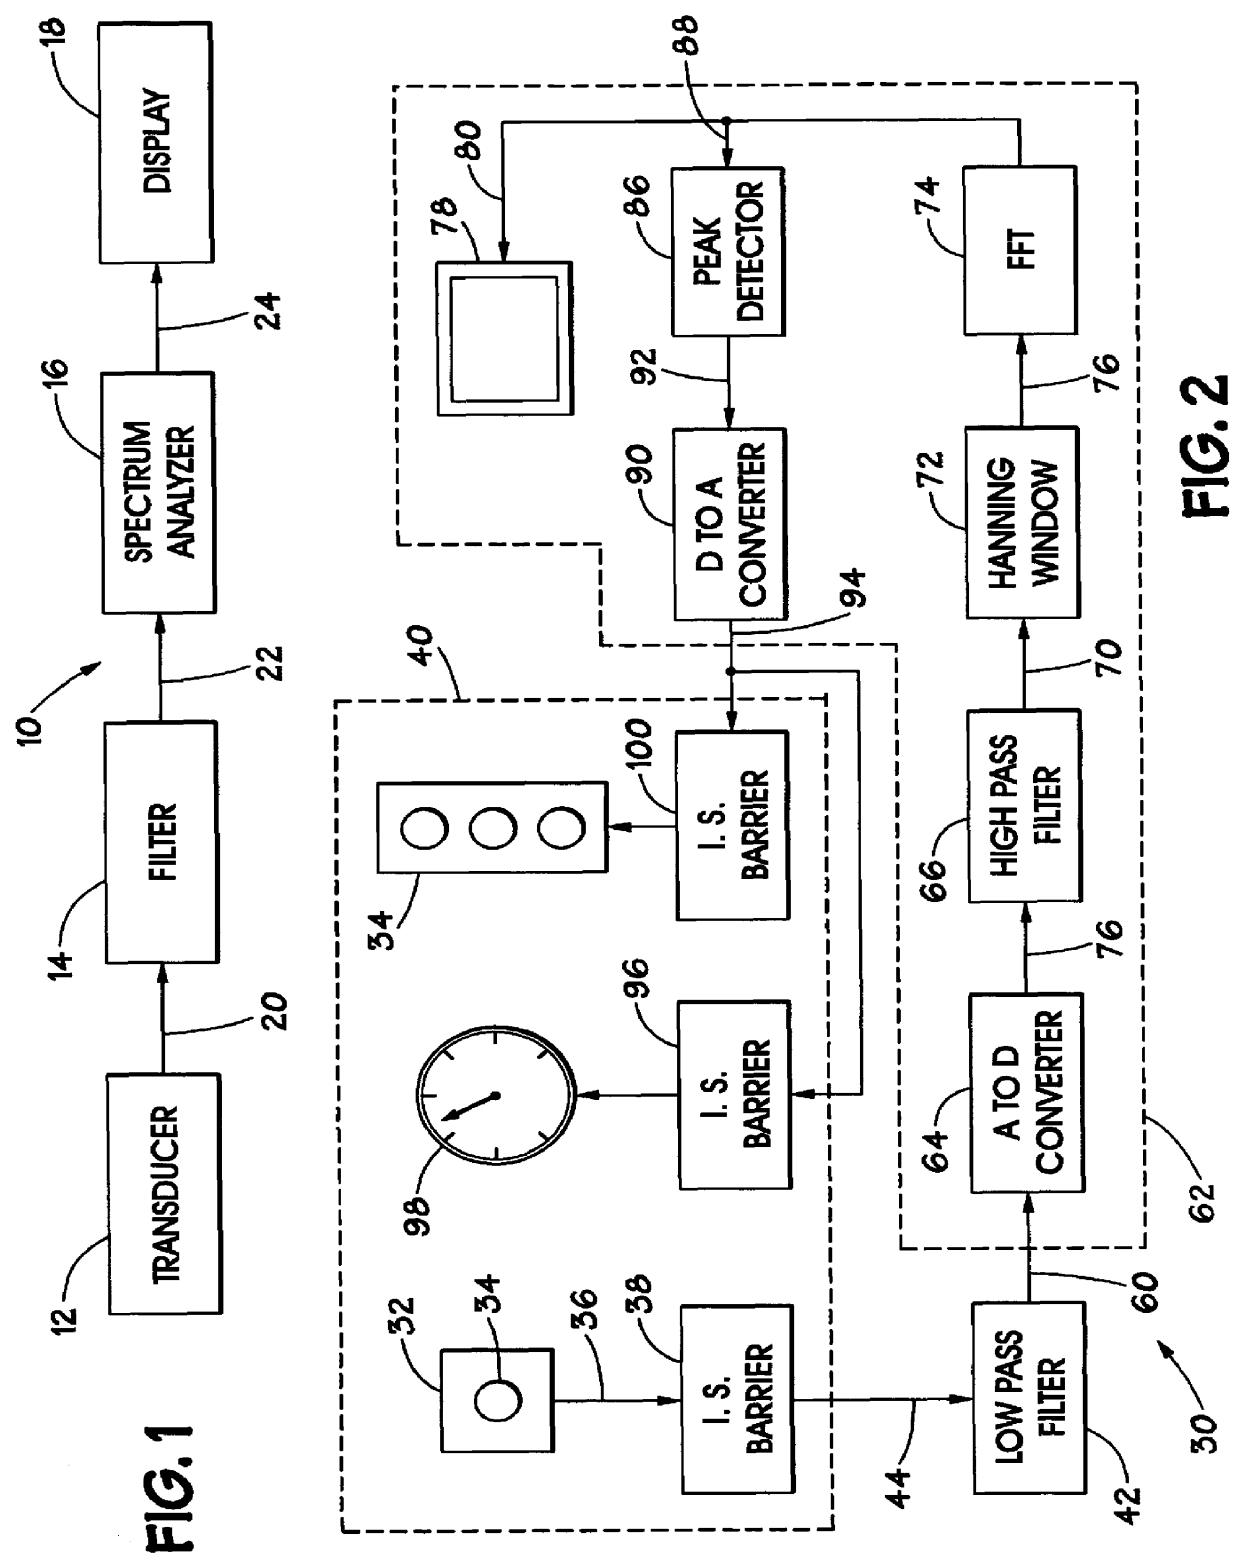 Method and apparatus for sensing and displaying torsional vibration